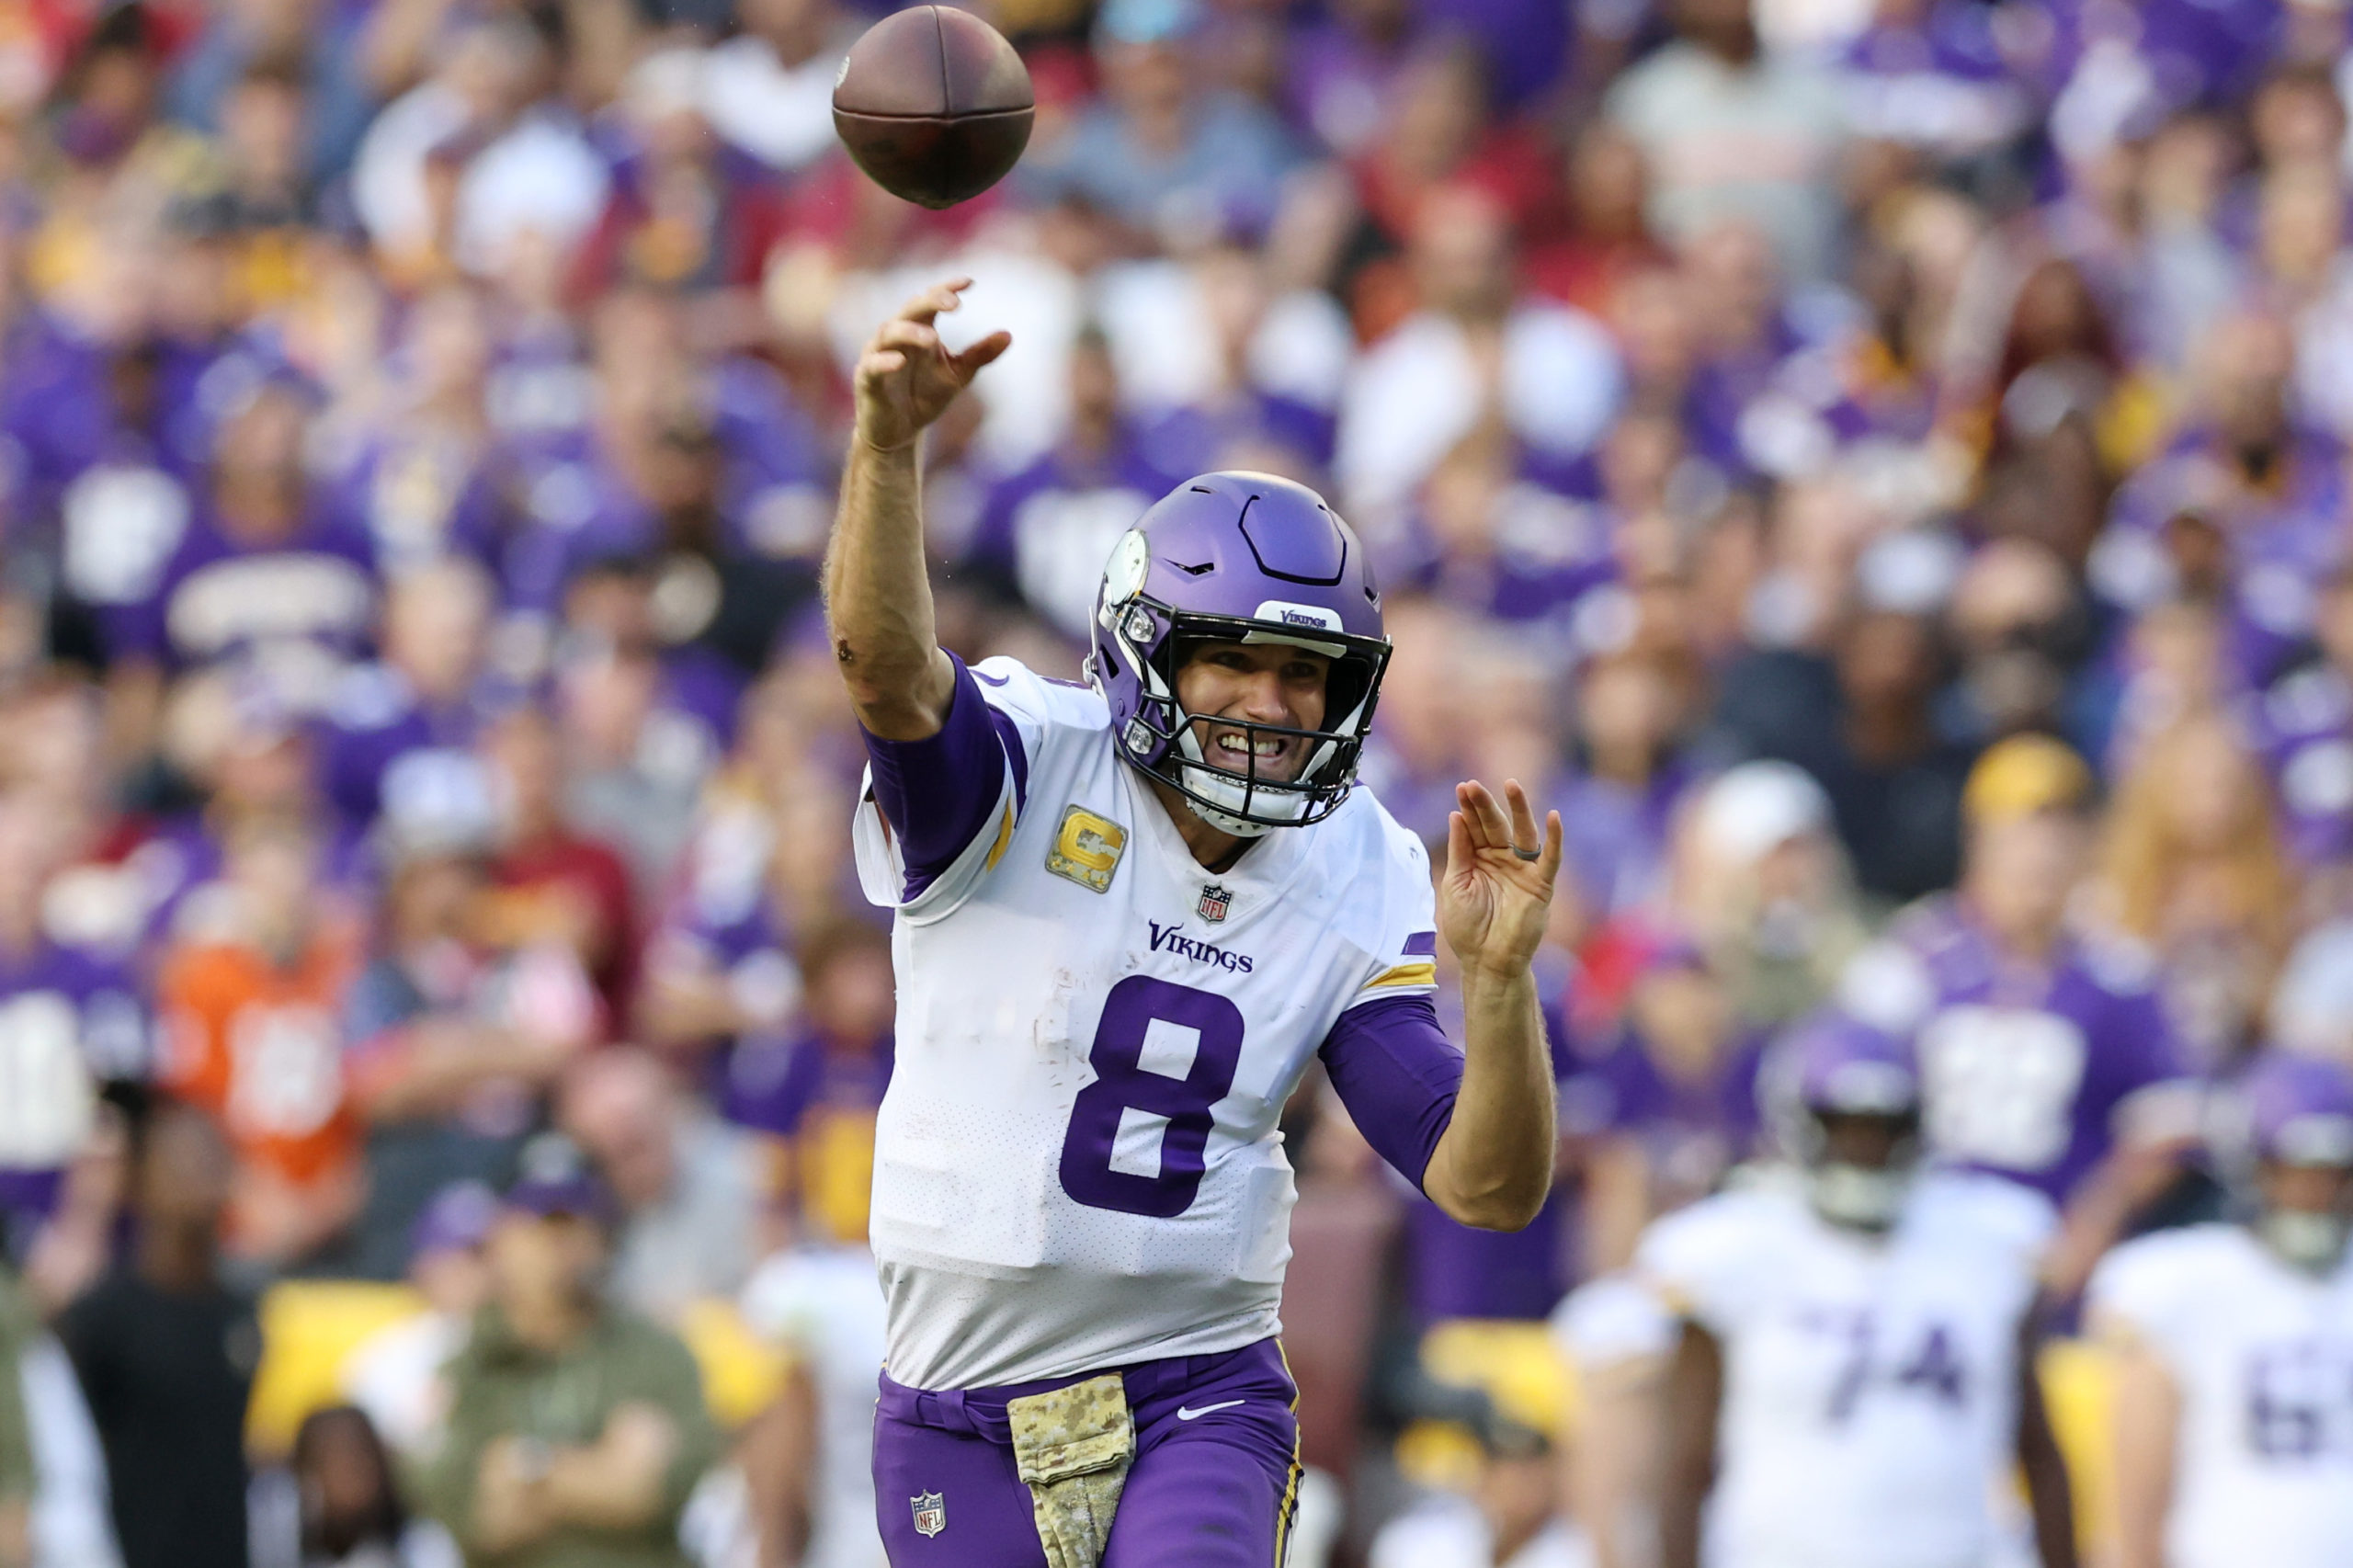 LANDOVER, MARYLAND - NOVEMBER 06: Kirk Cousins #8 of the Minnesota Vikings throws the ball in the fourth quarter of the game against the Washington Commanders at FedExField on November 06, 2022 in Landover, Maryland. Todd Olszewski/Getty Images